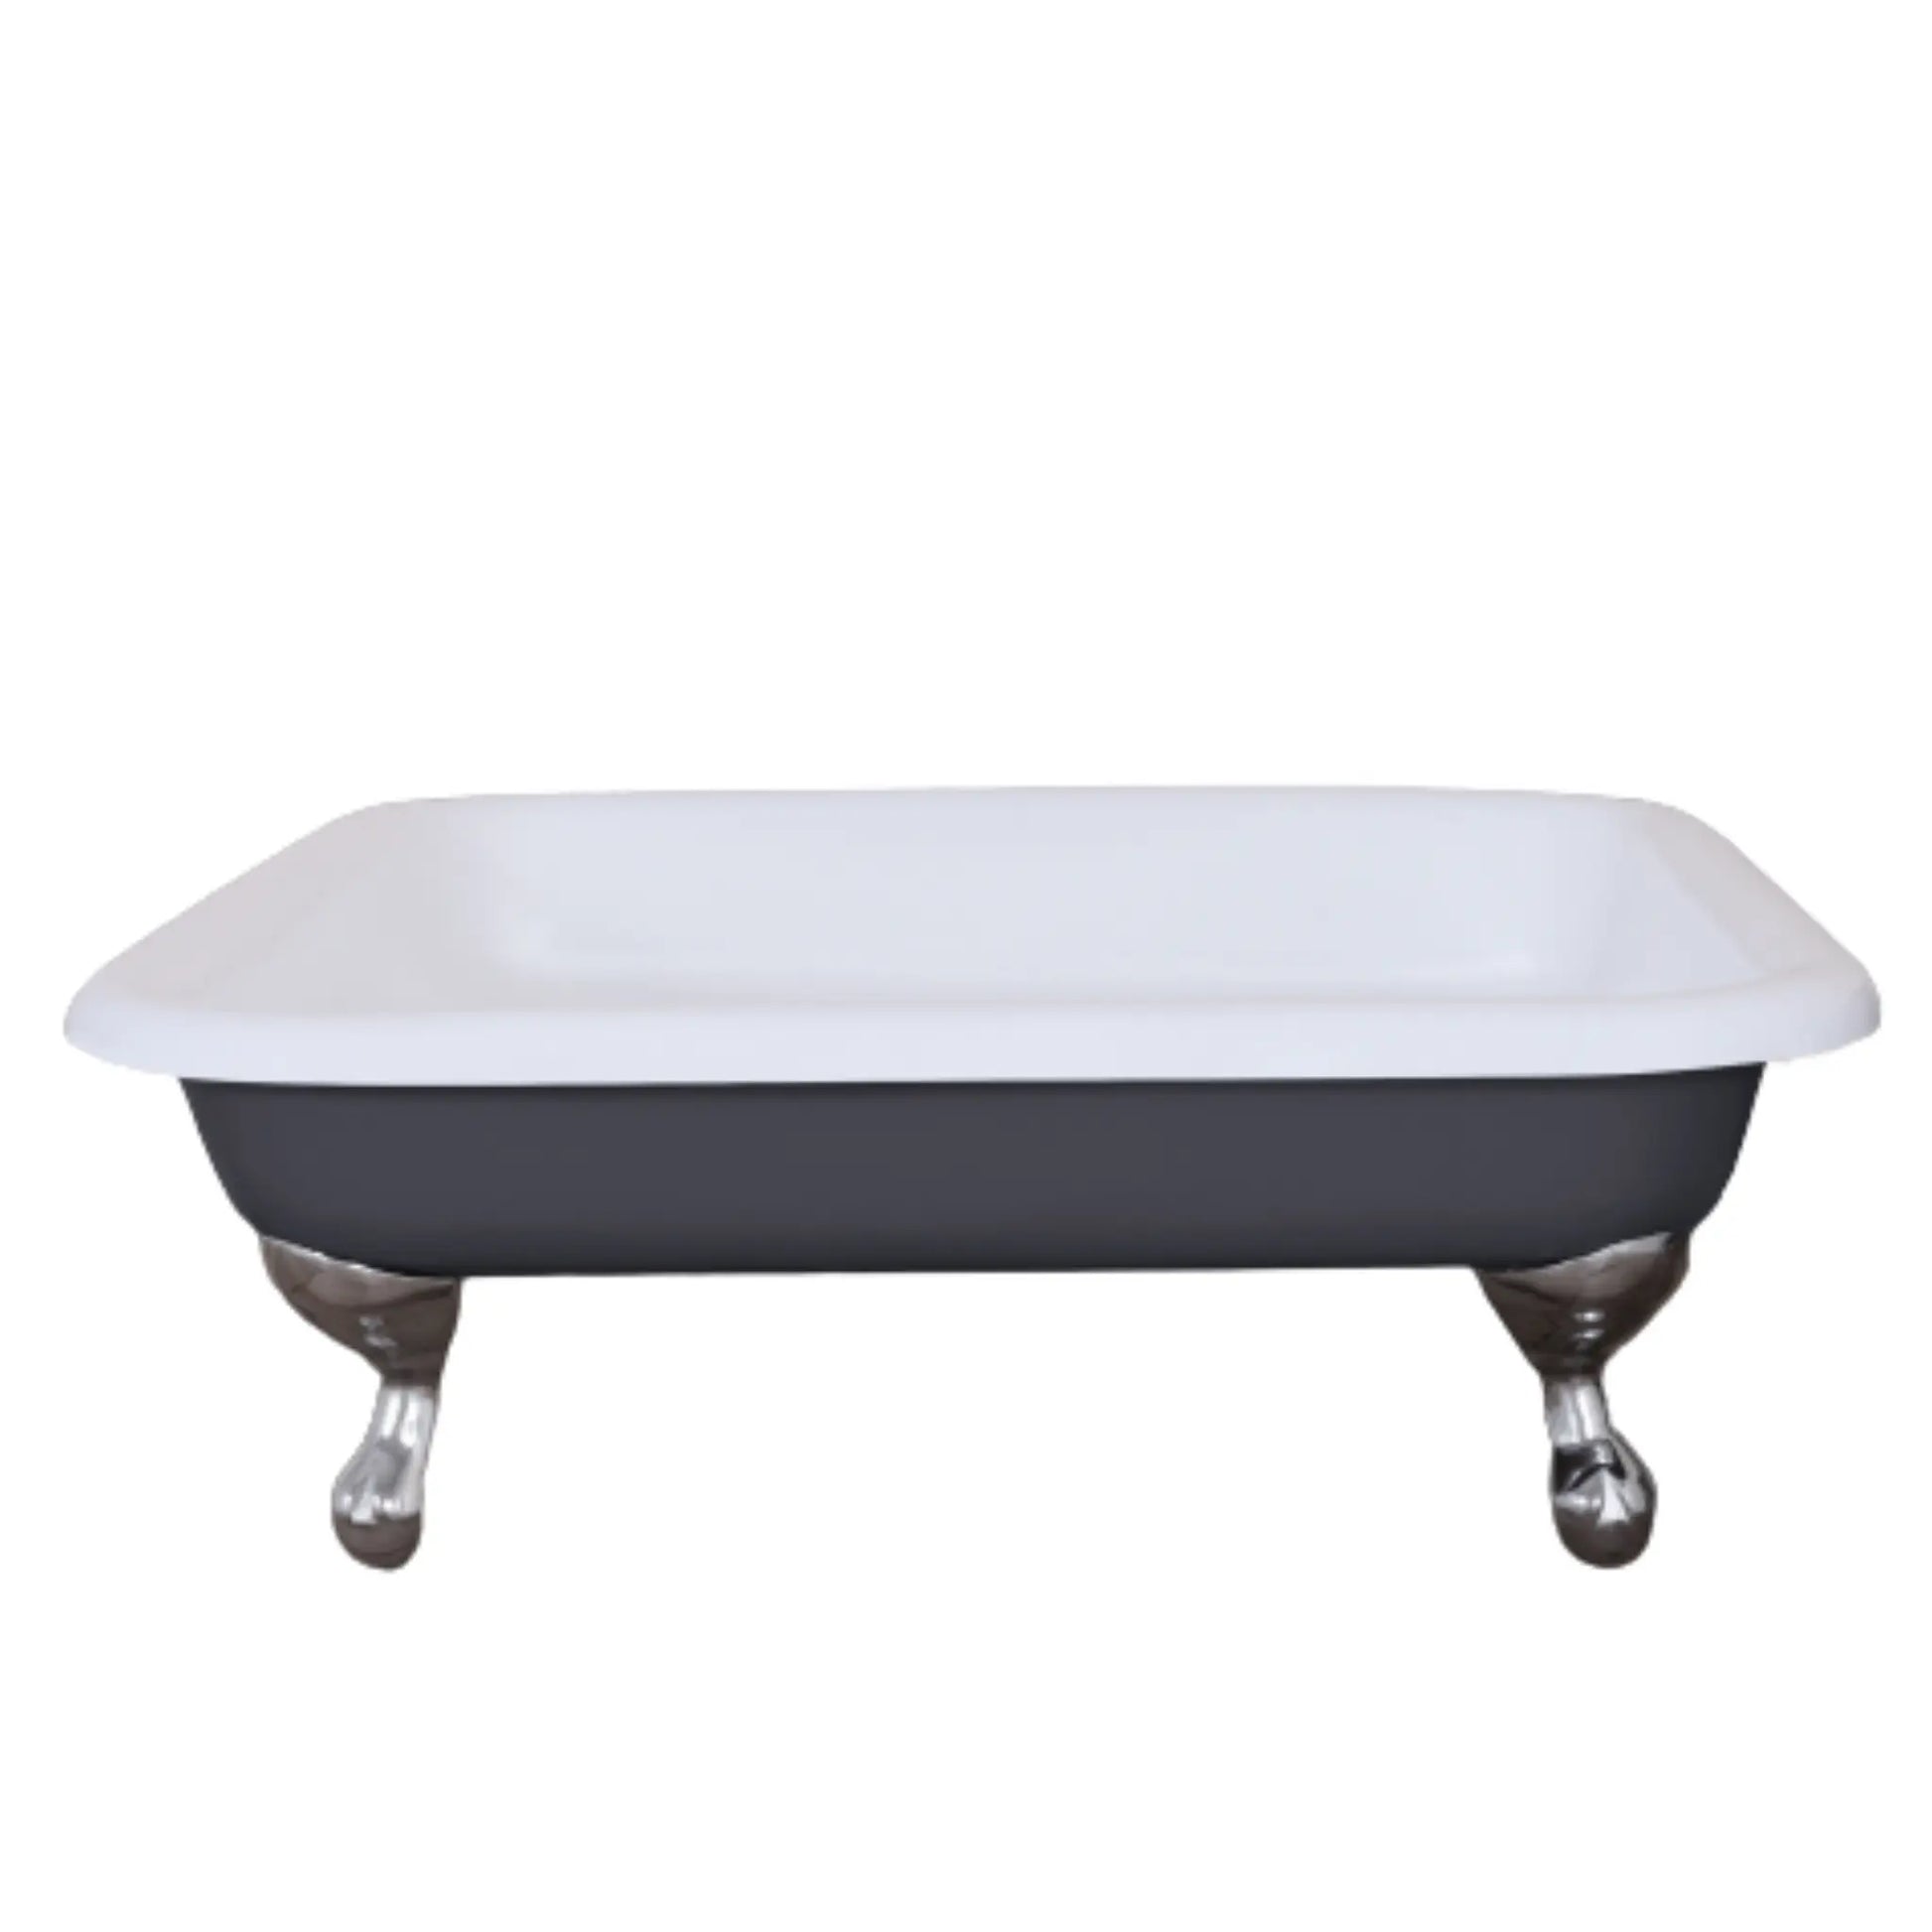 Hurlingham, Roll Top, Chatterton Painted Shower Tray, 910 x 300mm - Beyond Bathing 